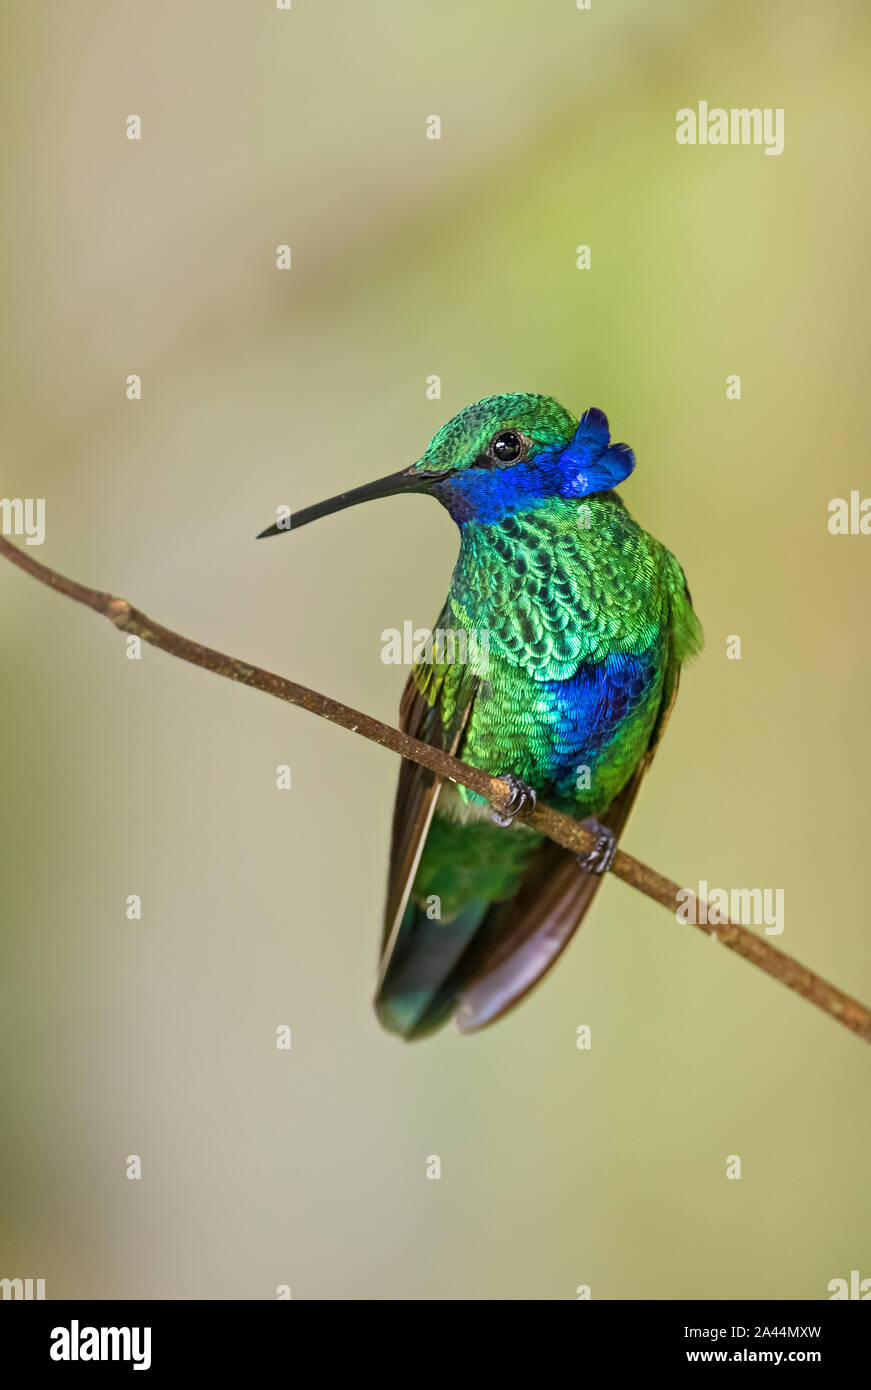 Sparkling Violet-ear - Colibri coruscans, beautiful green hummingbird with blue ears from Andean slopes of South America, Wild Sumaco, Ecuador. Stock Photo